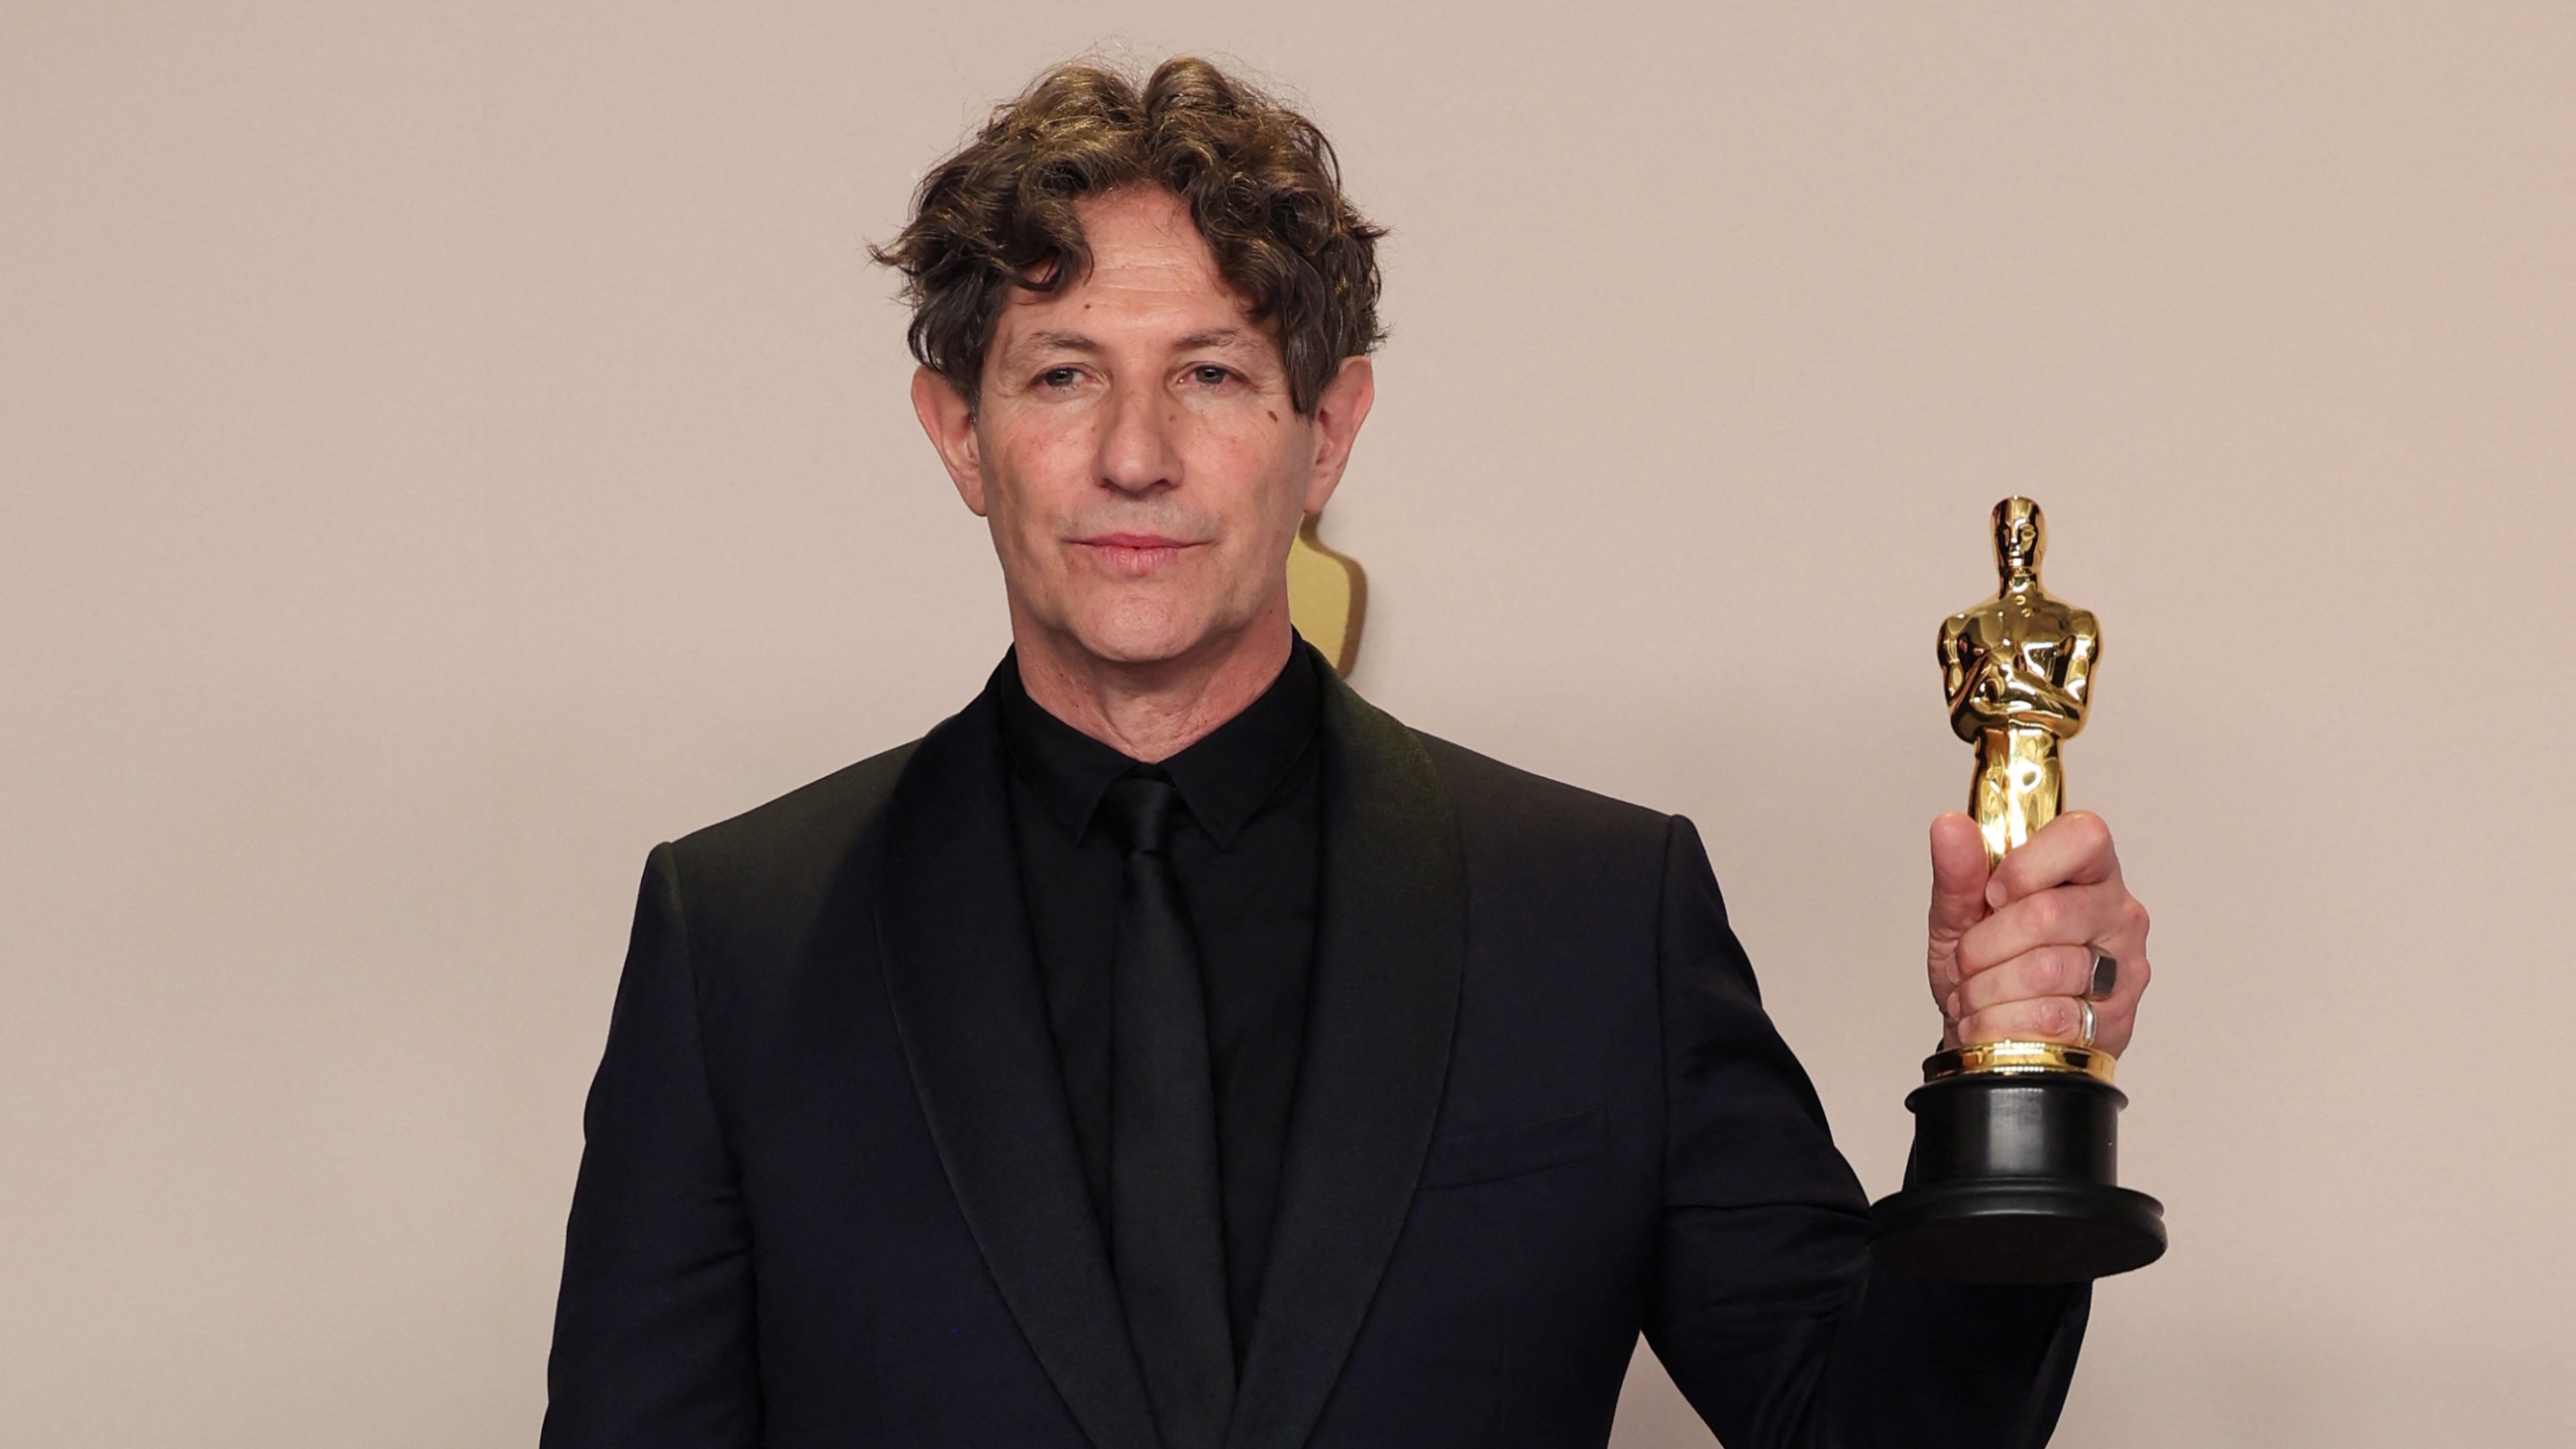 Jonathan Glazer poses with the Oscar for Best International Feature Film for "The Zone of Interest" (Reuters/Carlos Barria).